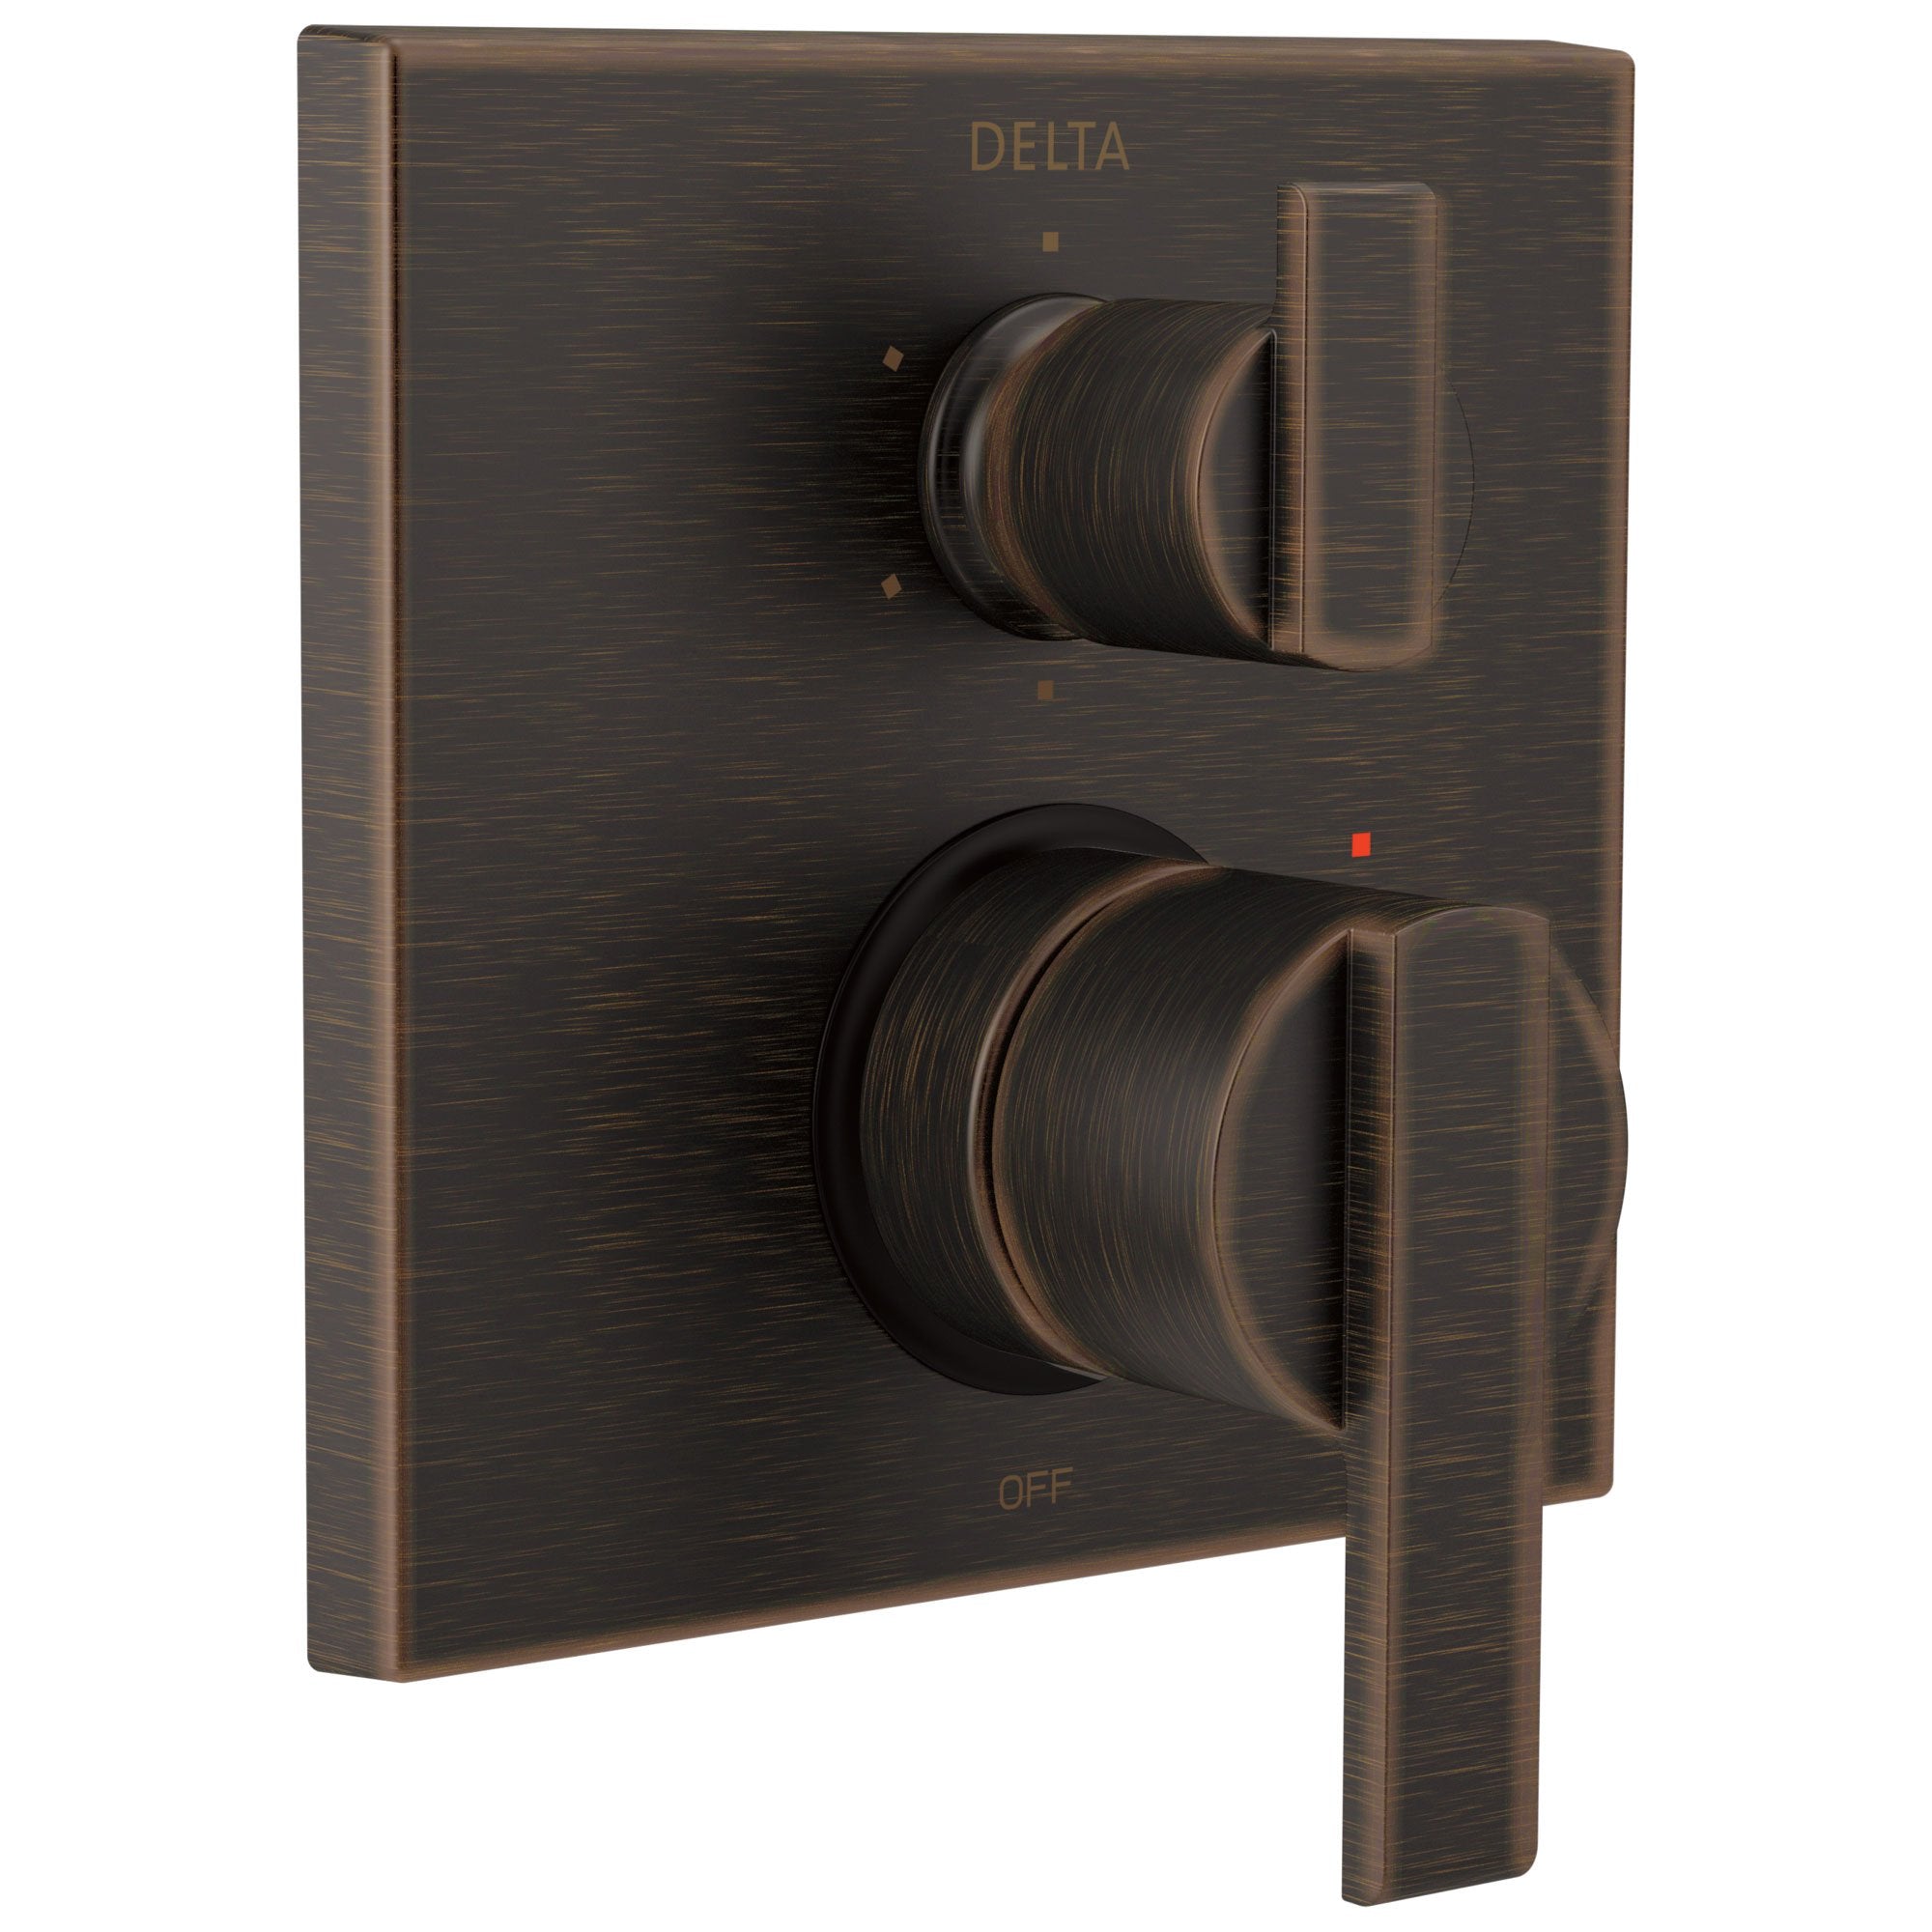 Delta Ara Venetian Bronze Modern Monitor 14 Shower Faucet Control Handle with 6-Setting Integrated Diverter Includes Trim Kit and Valve without Stops D2192V